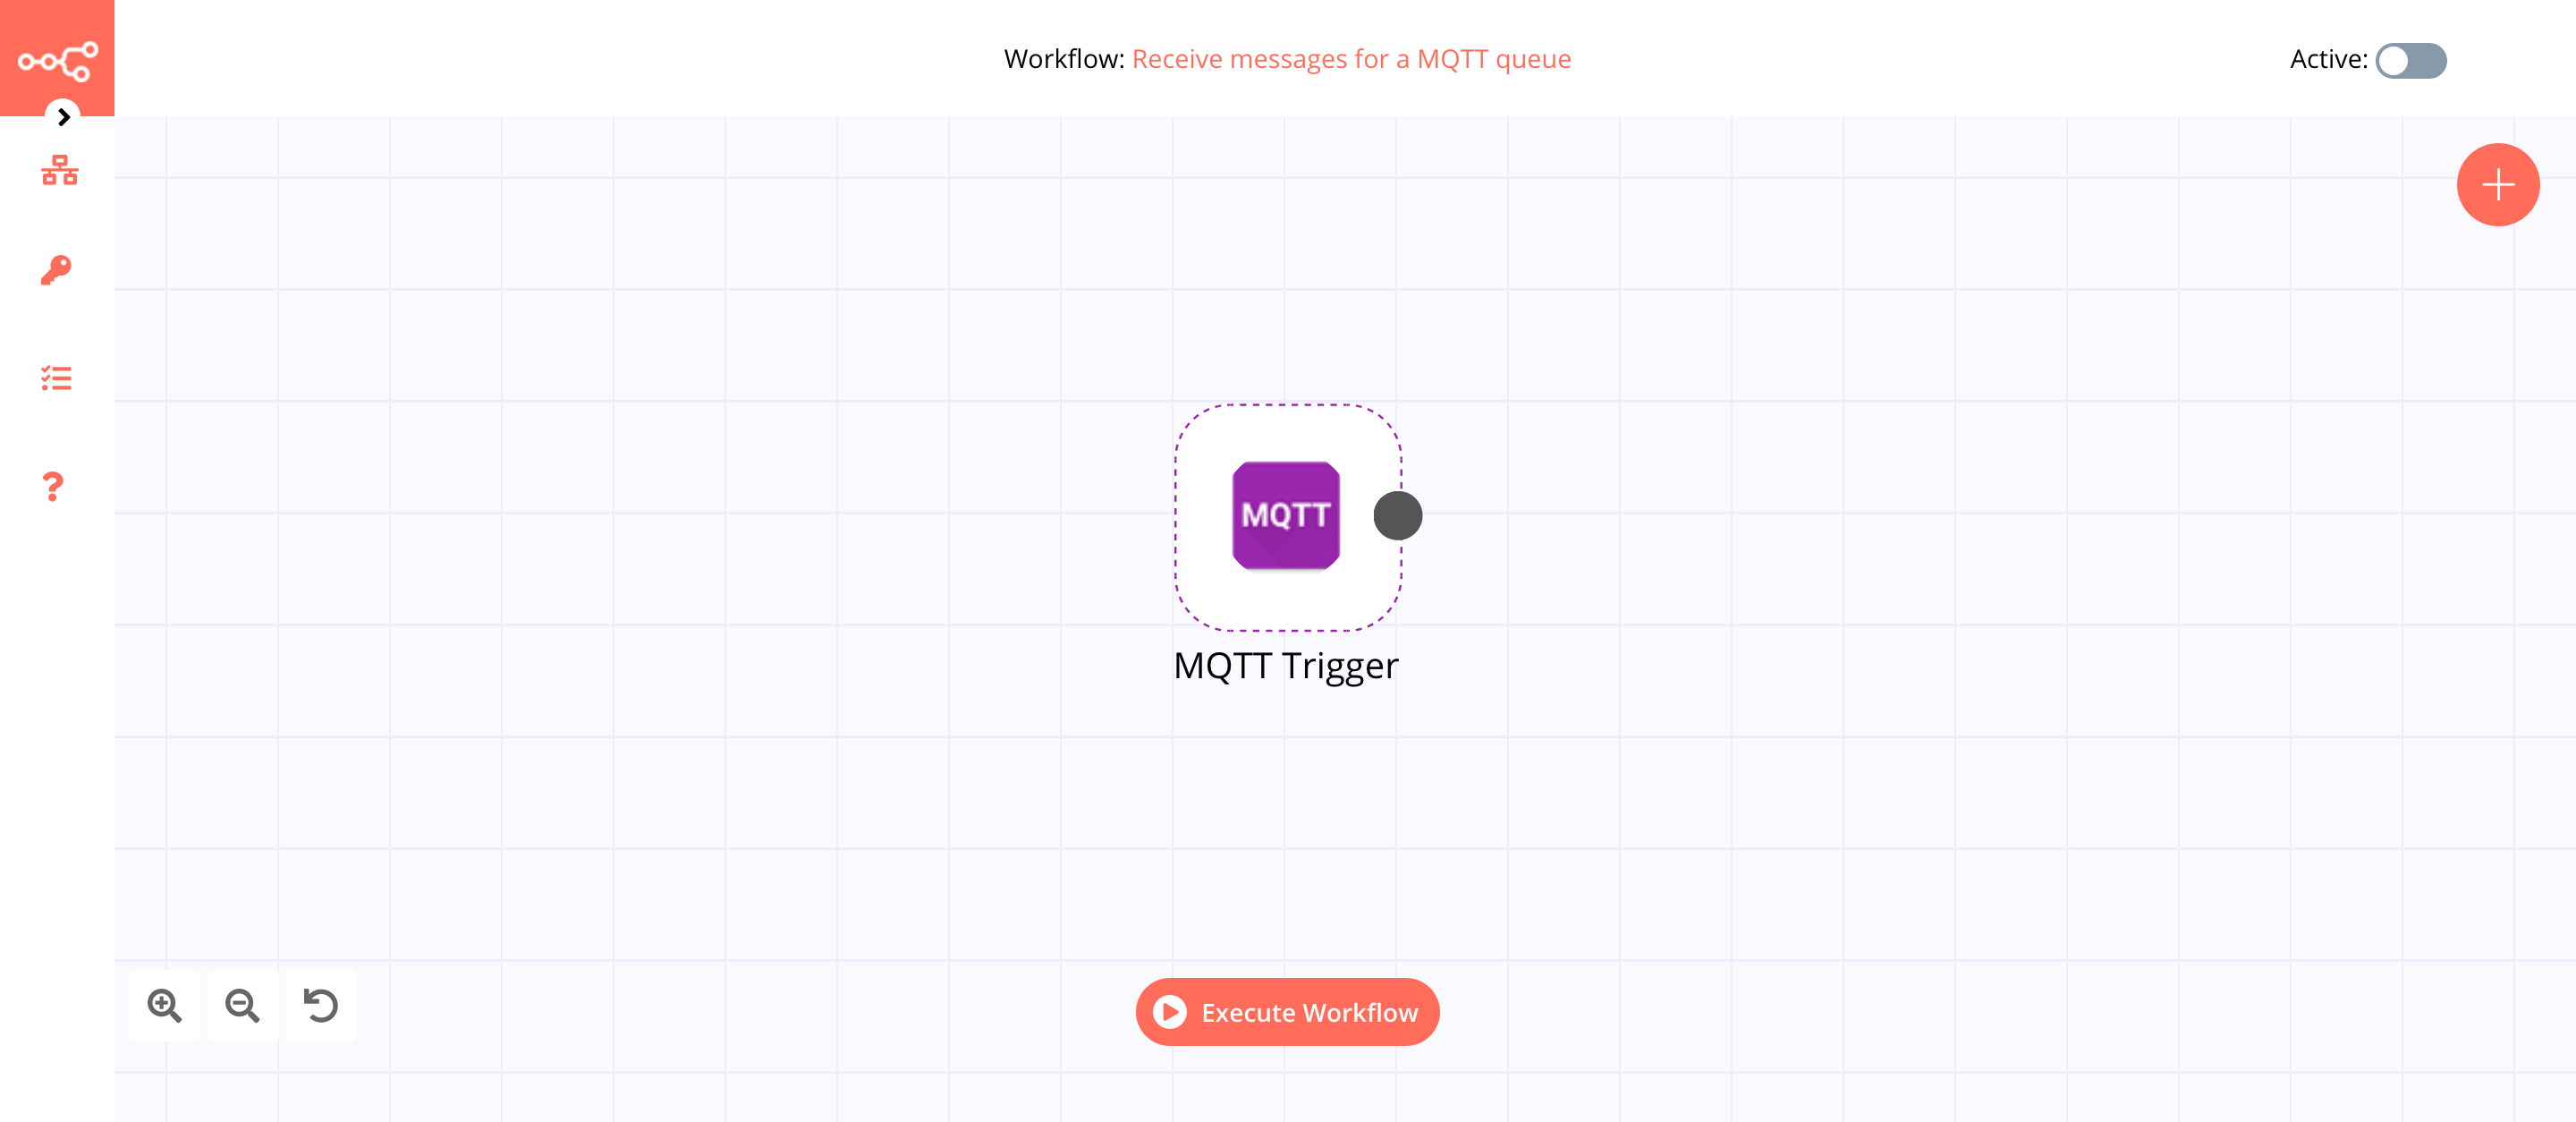 A workflow with the MQTT Trigger node